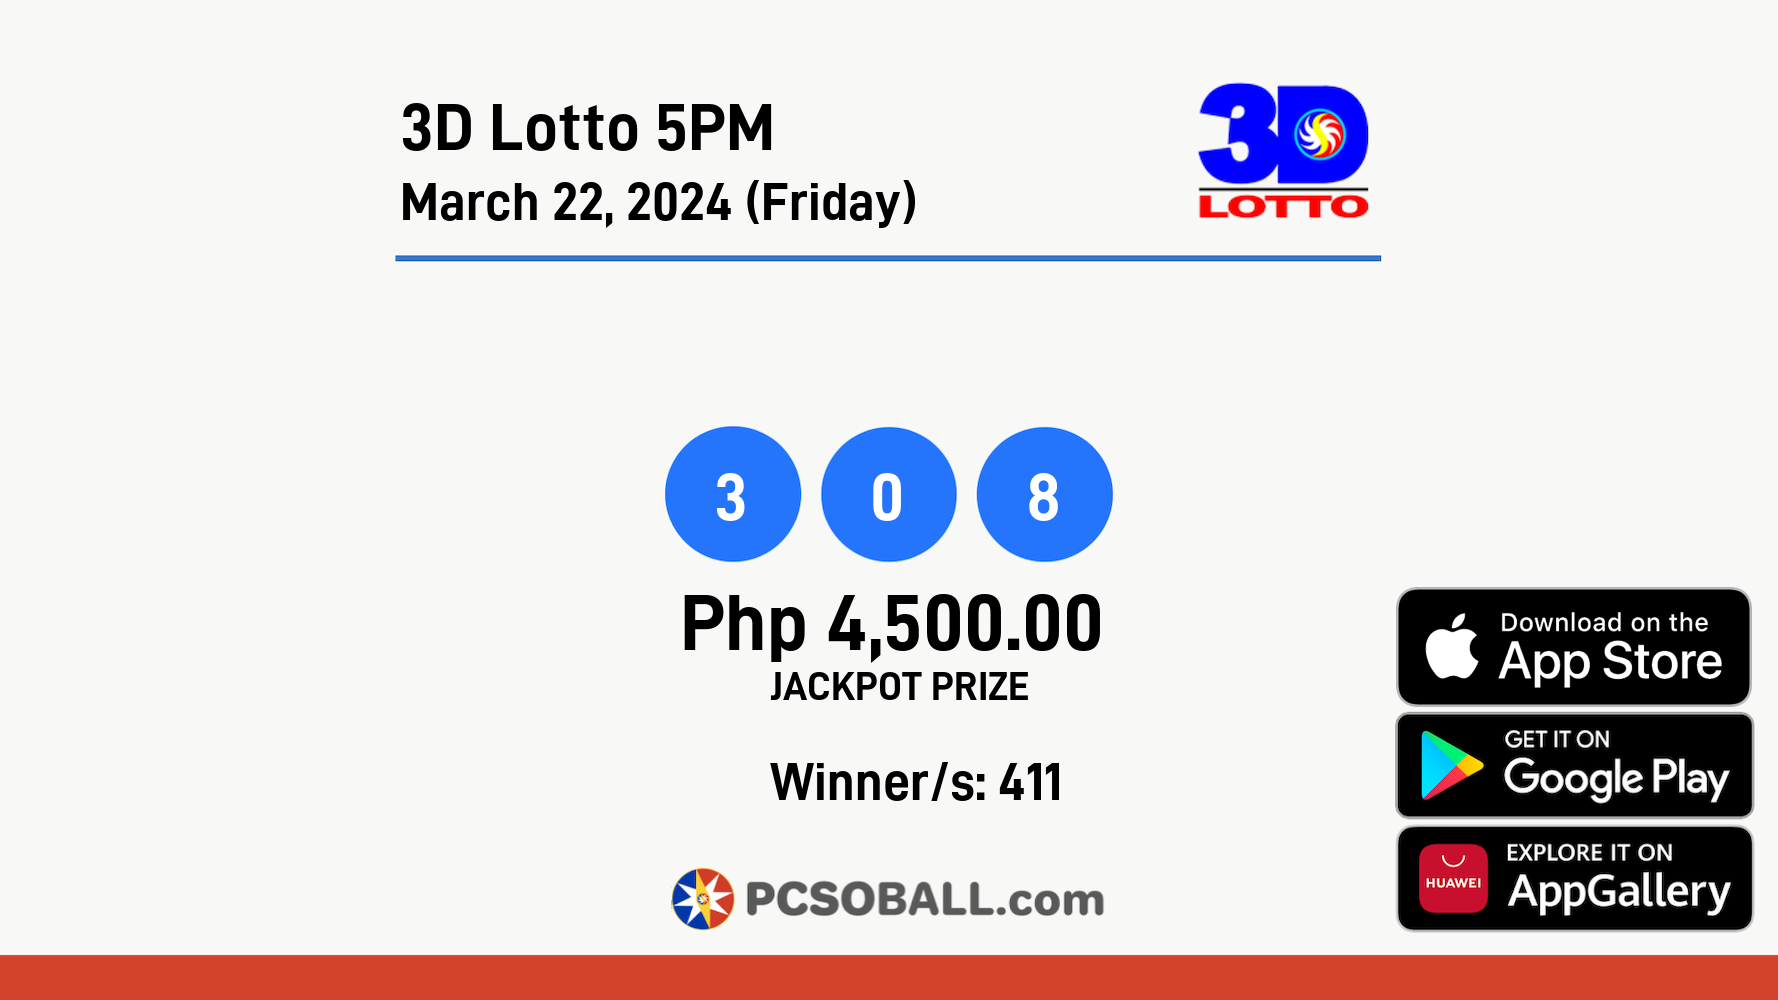 3D Lotto 5PM March 22, 2024 (Friday) Result